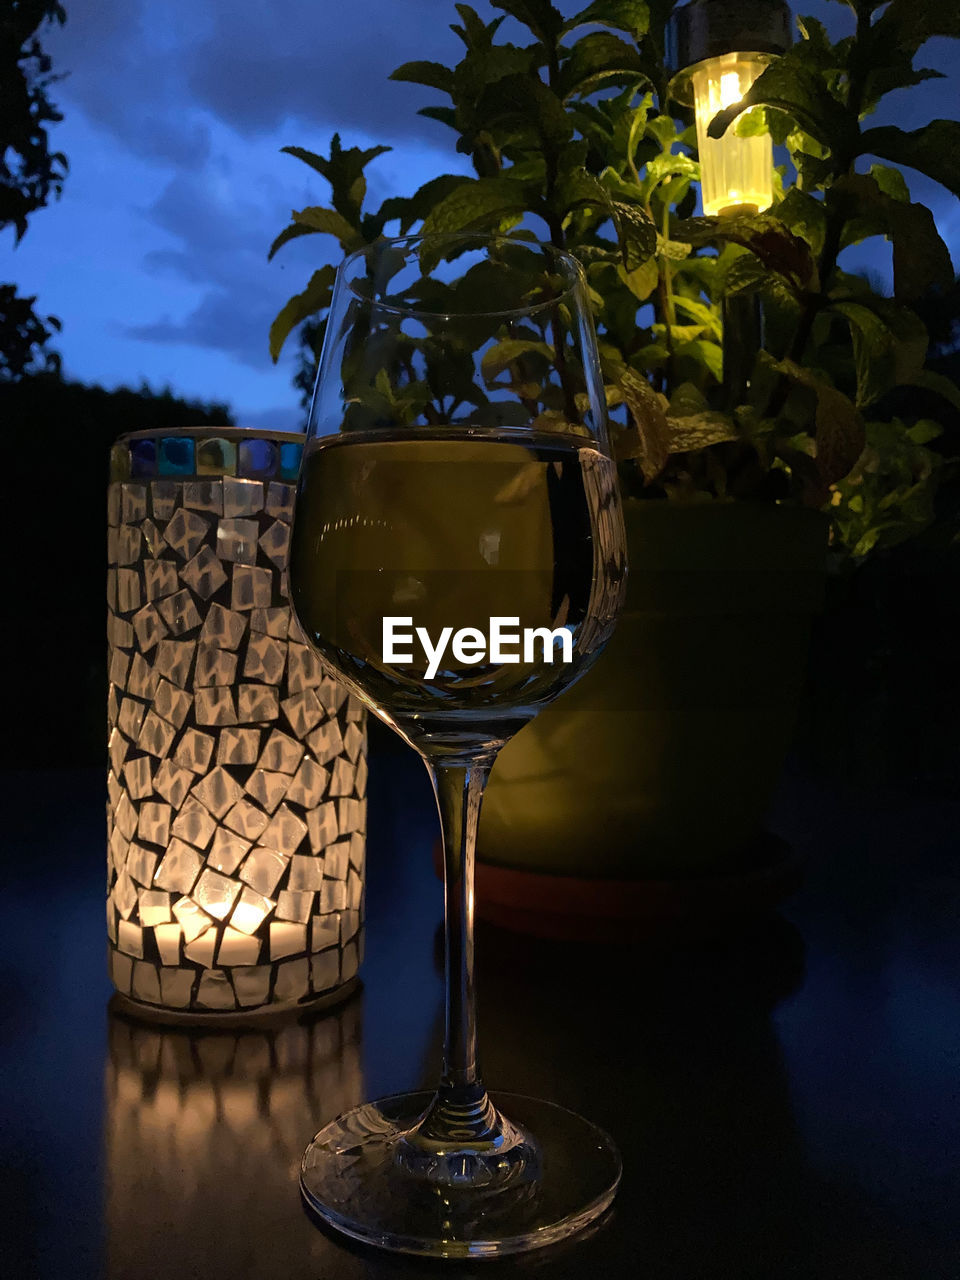 CLOSE-UP OF WINE GLASS ON TABLE AGAINST ILLUMINATED LAMP